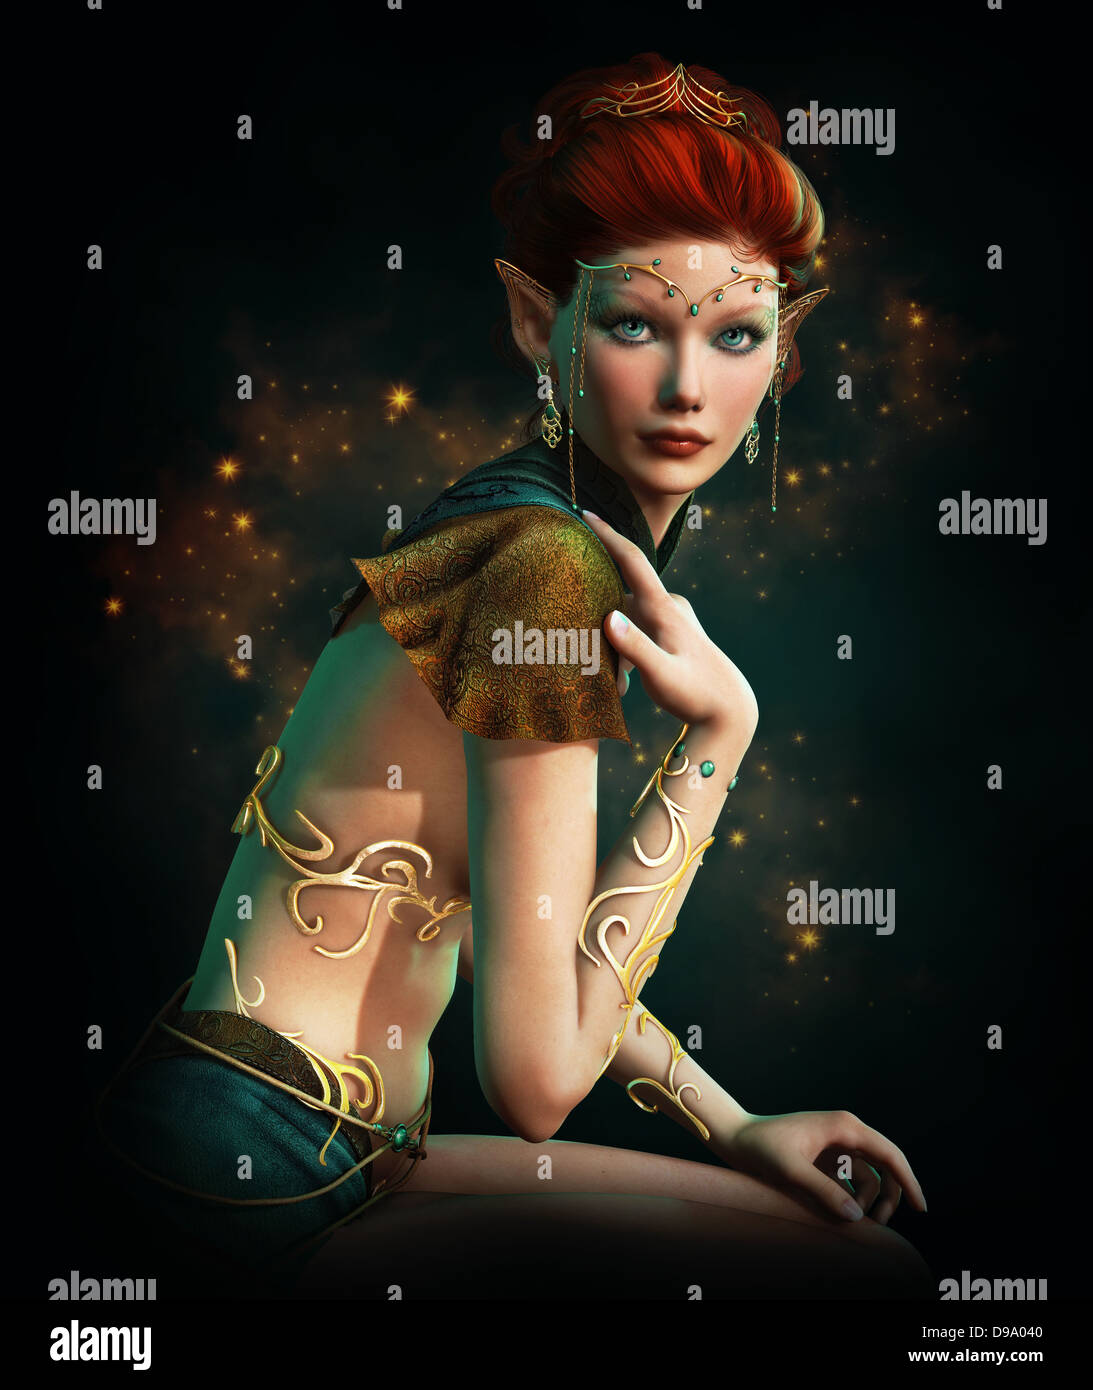 a elven princess with golden diadem, body jewelry and Turquoise gemstones Stock Photo